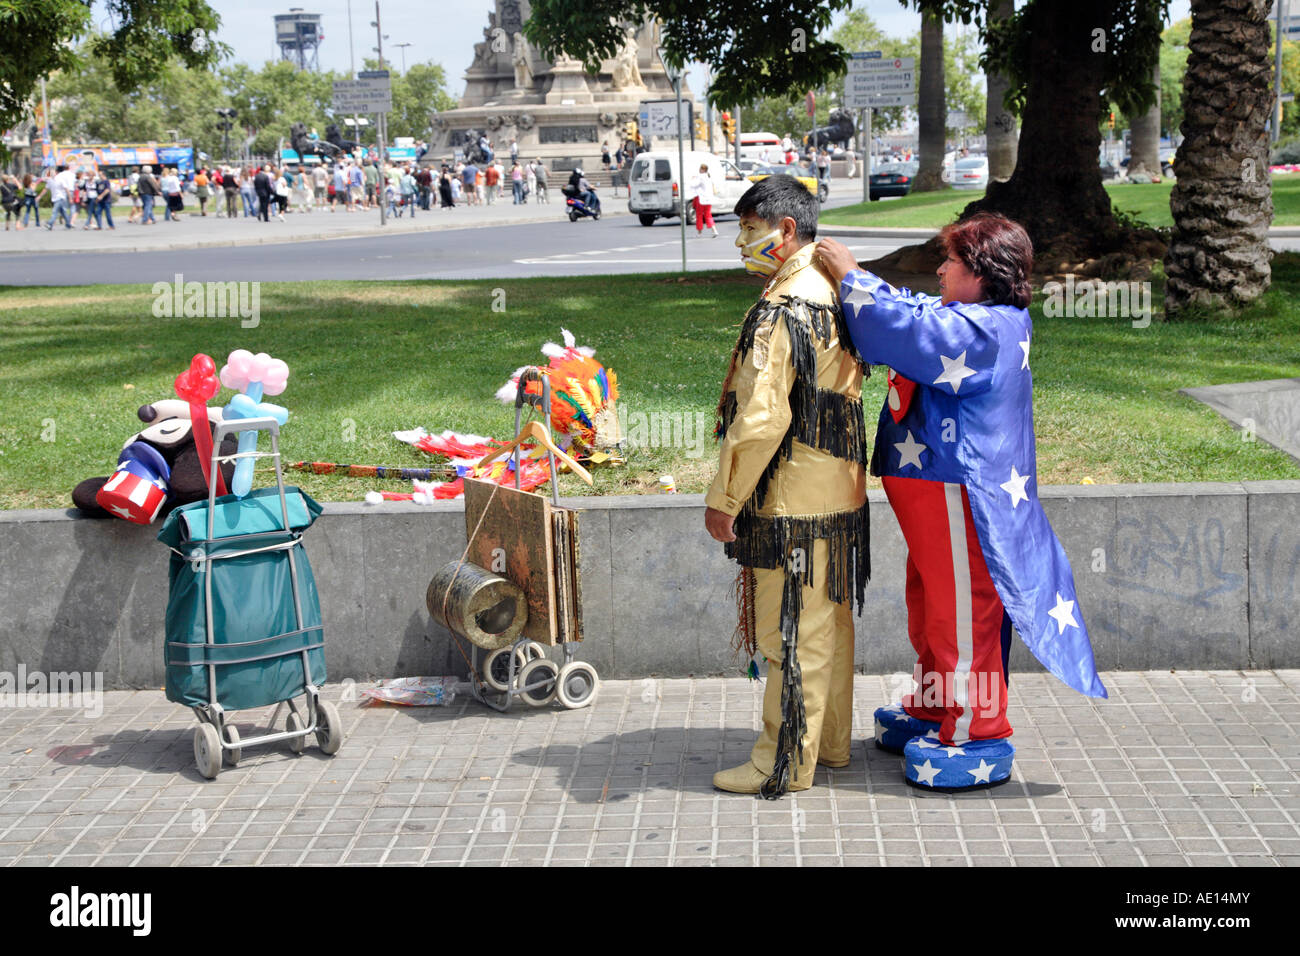 a woman dressed as minnie mouse helps a man into his native american costume in barcelona, spain Stock Photo